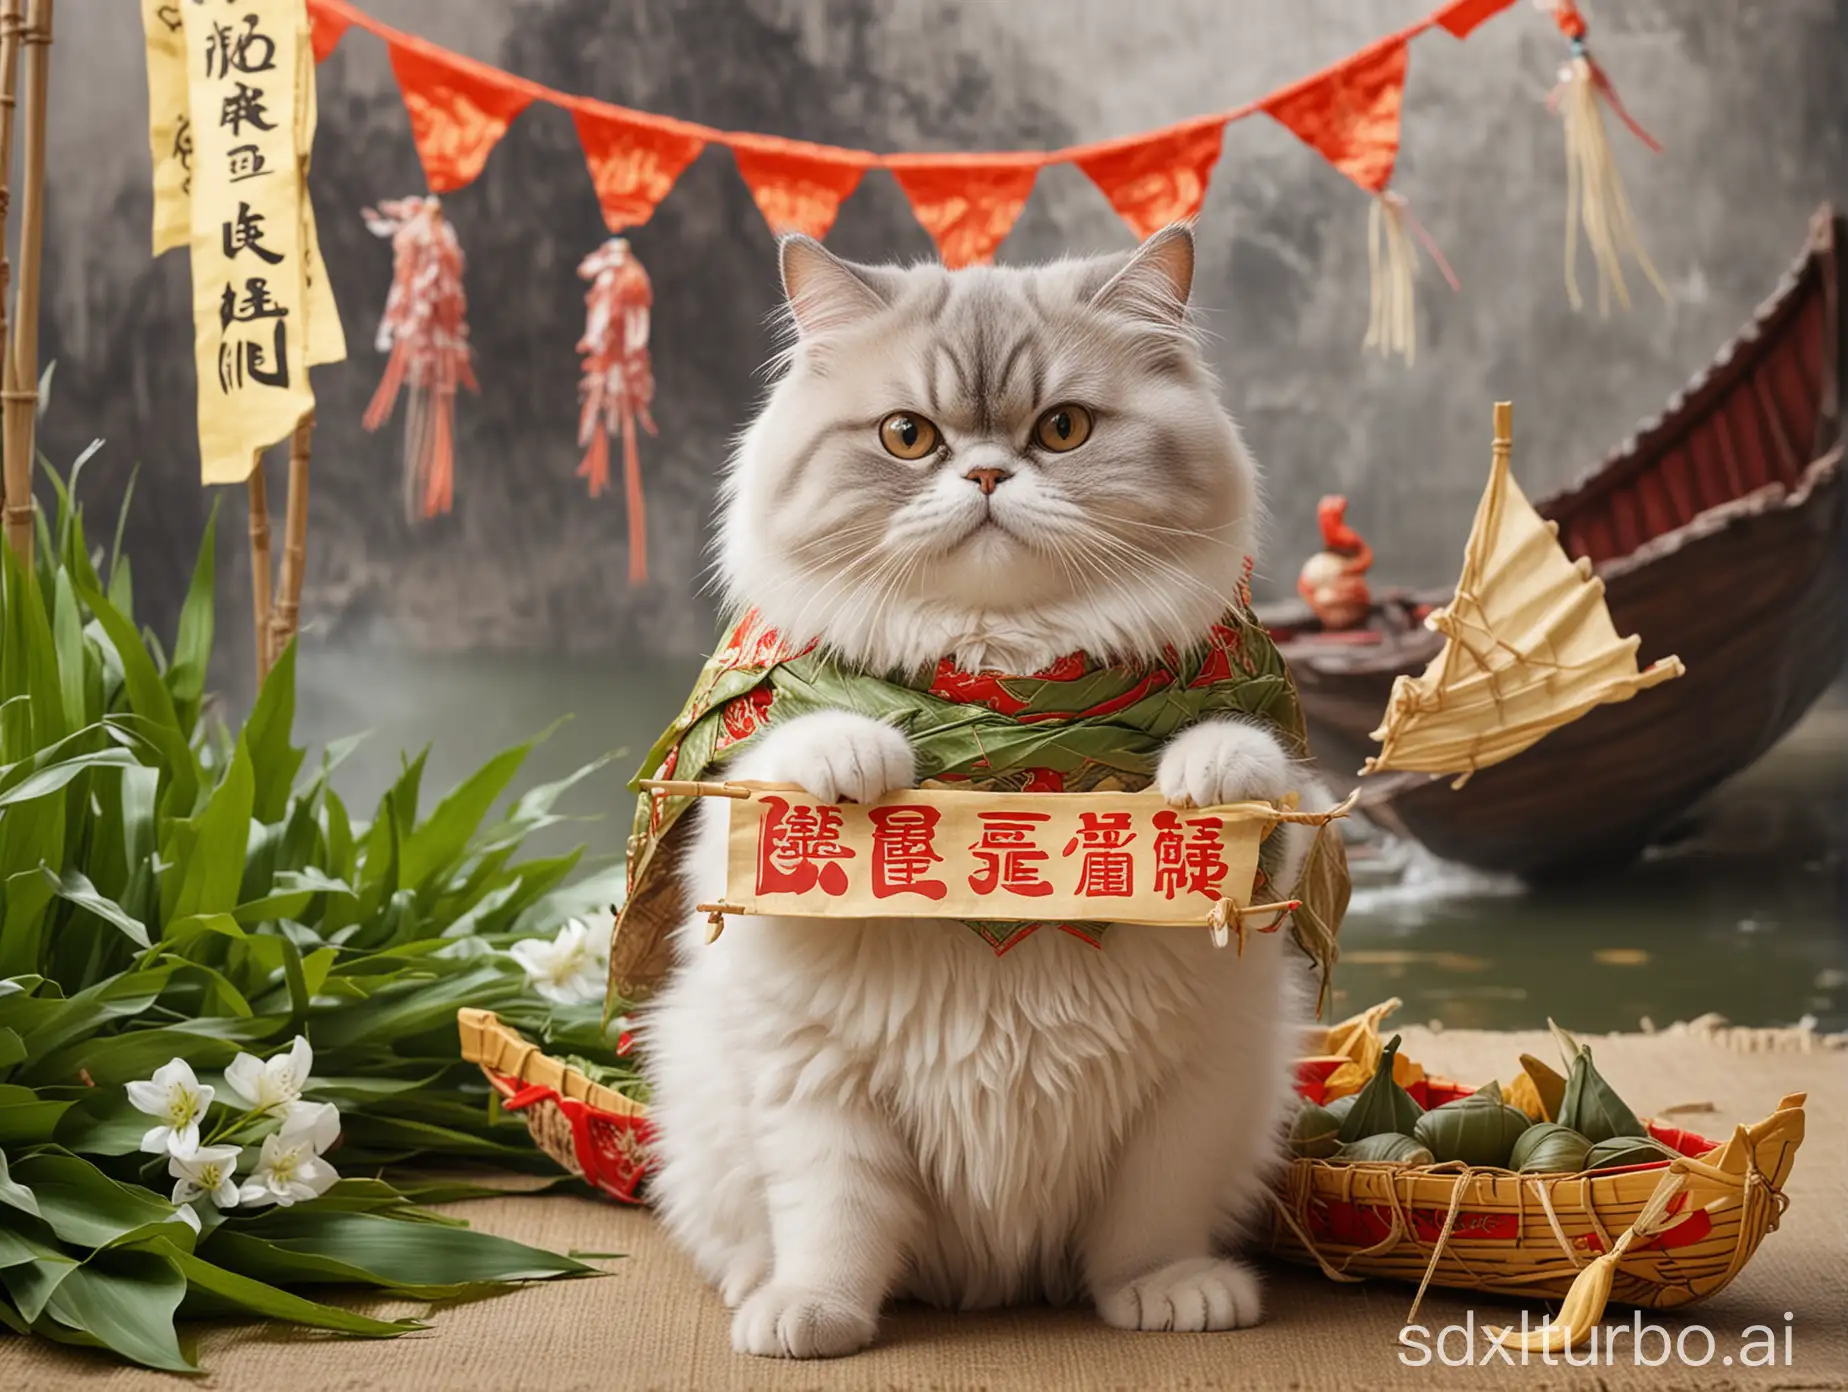 a fluffy fat cat holding a banner that says 'Happy Dragon Boat Festival', floor has zongzi and small boats, background has elements of Duanwu Festival